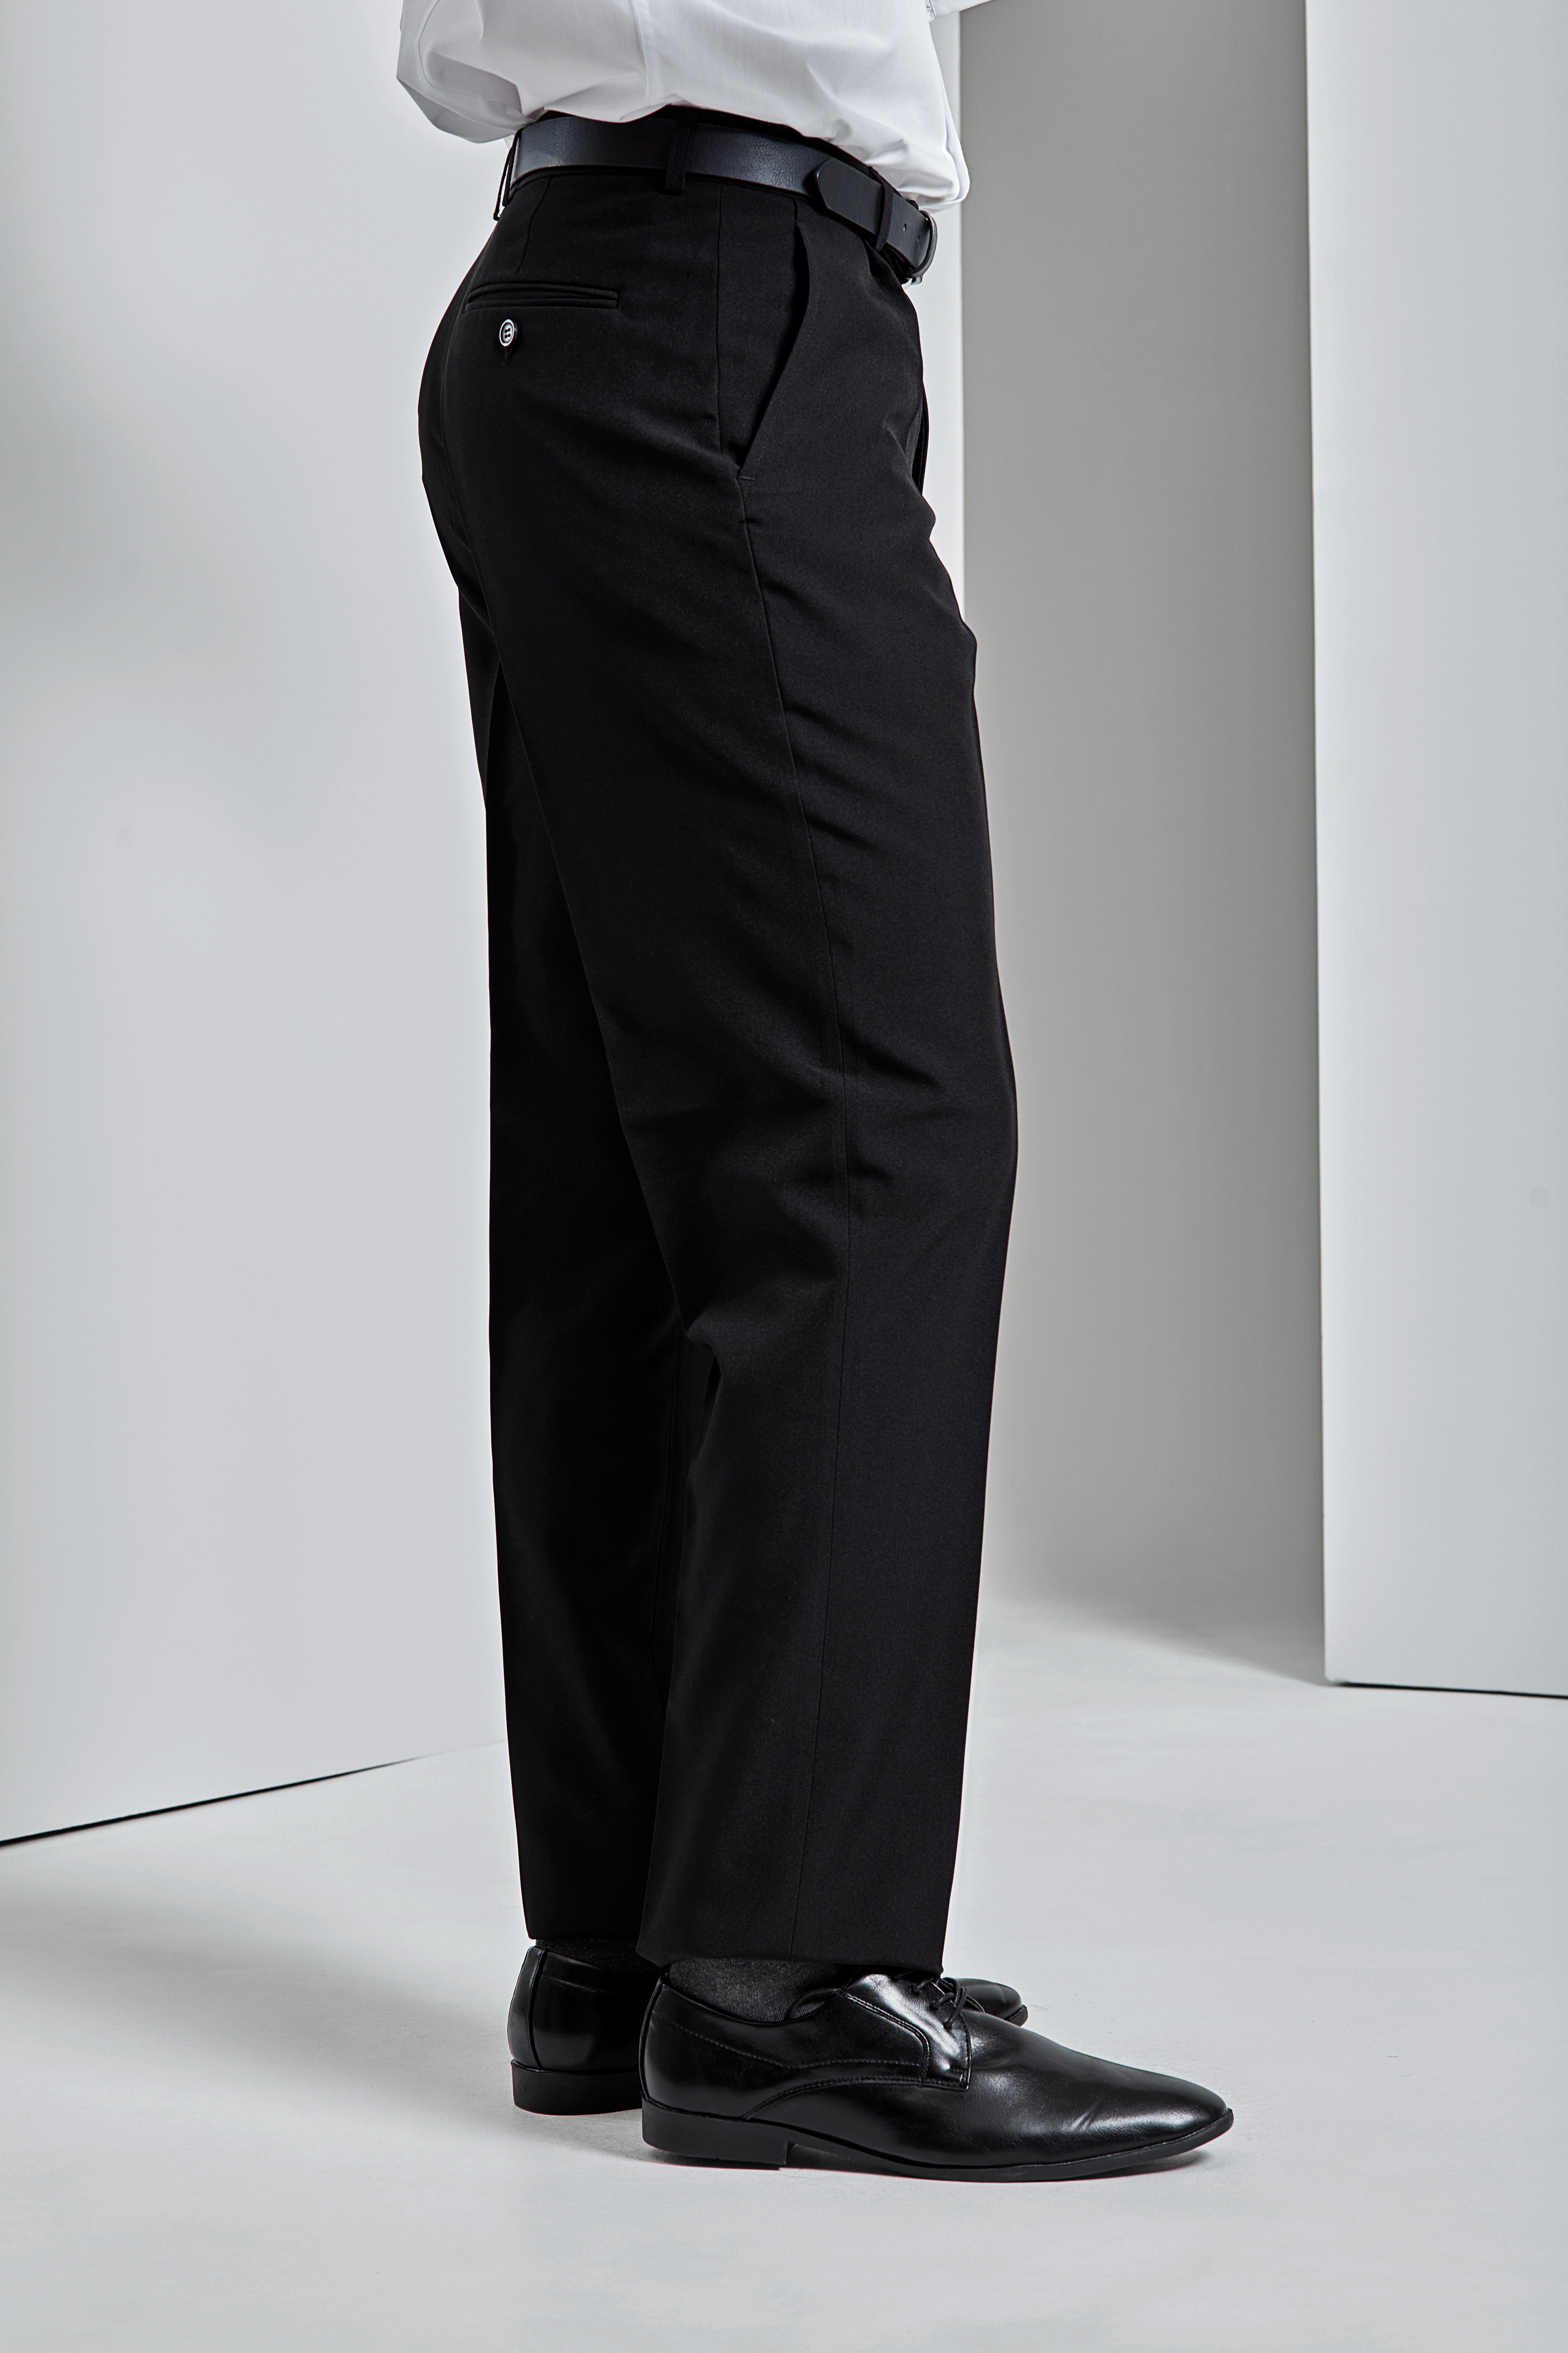 Premier Polyester Trousers - PenCarrie